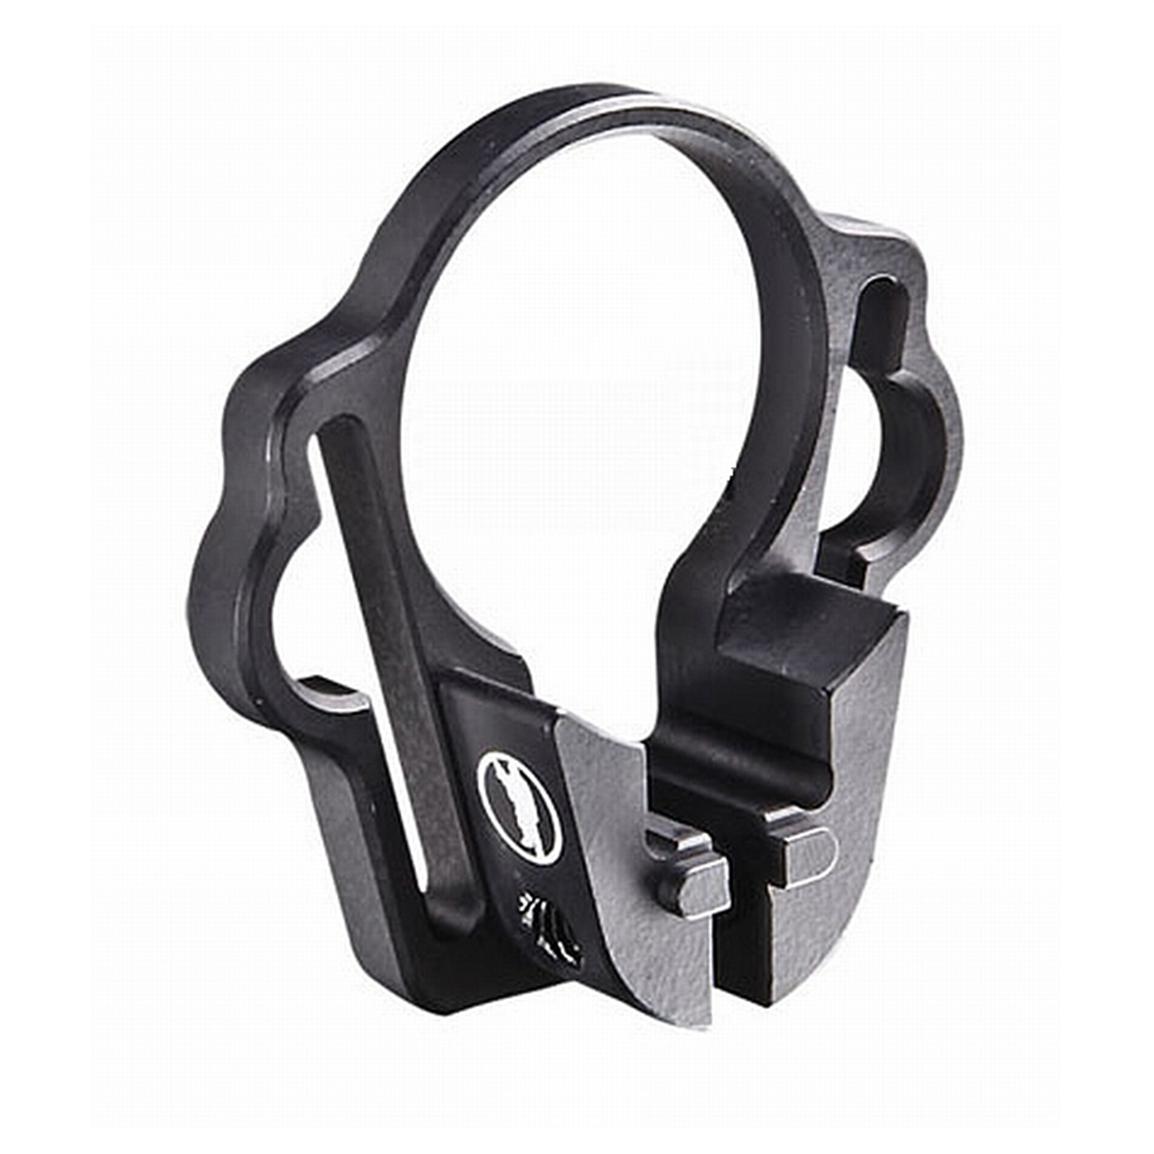 Caa® Opsm Ar 15 Carbine One Point Sling Mount 581420 Gun Slings At